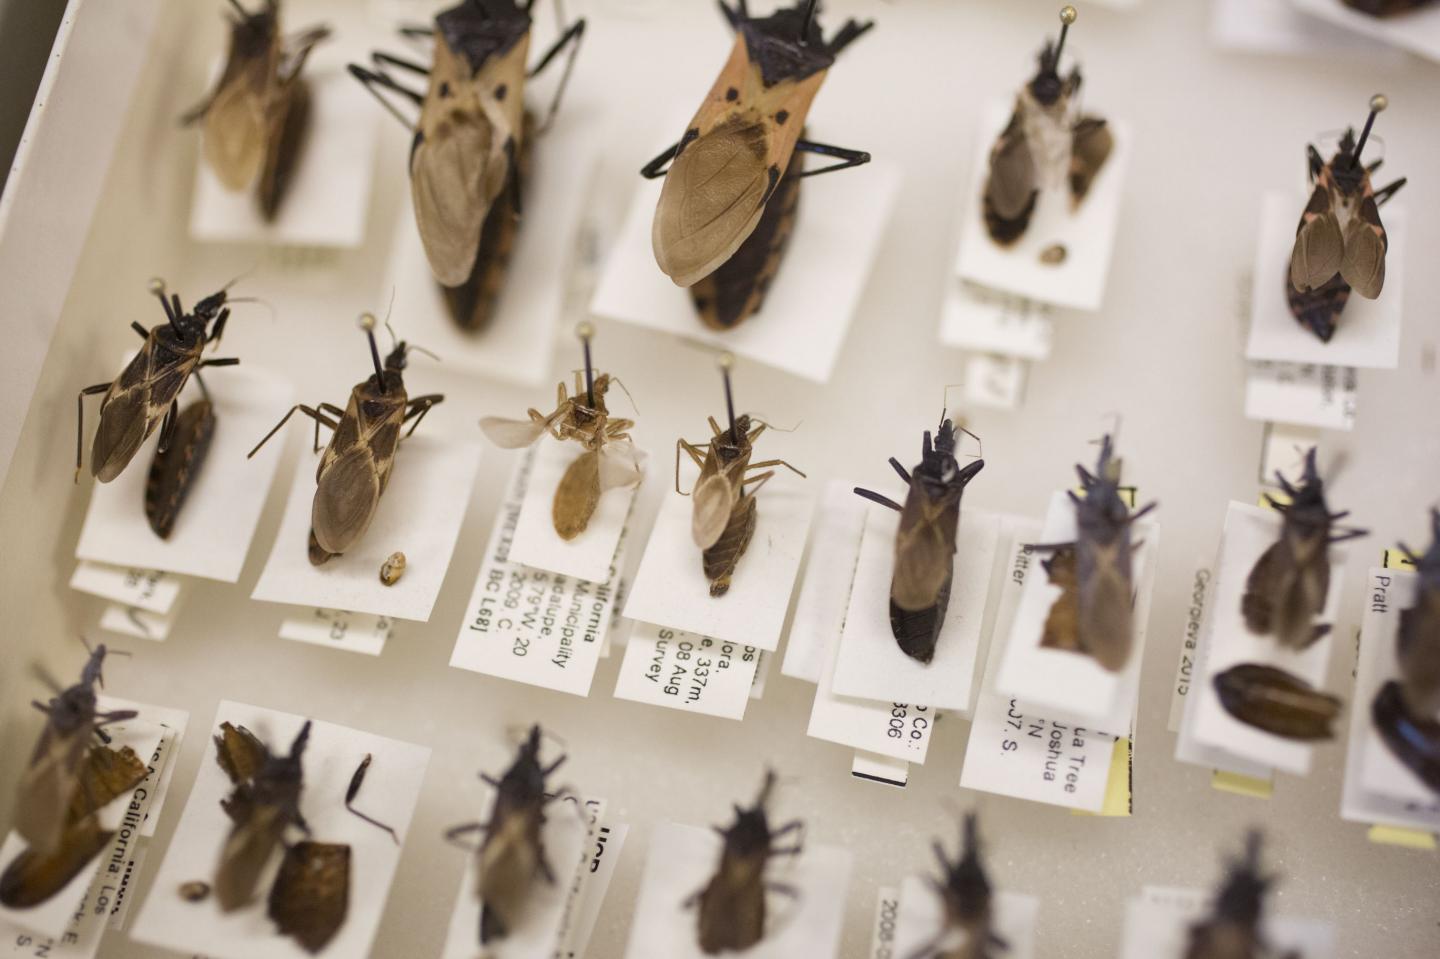 All Species of Kissing Bug in California Are Capable of Transmitting Chagas Disease